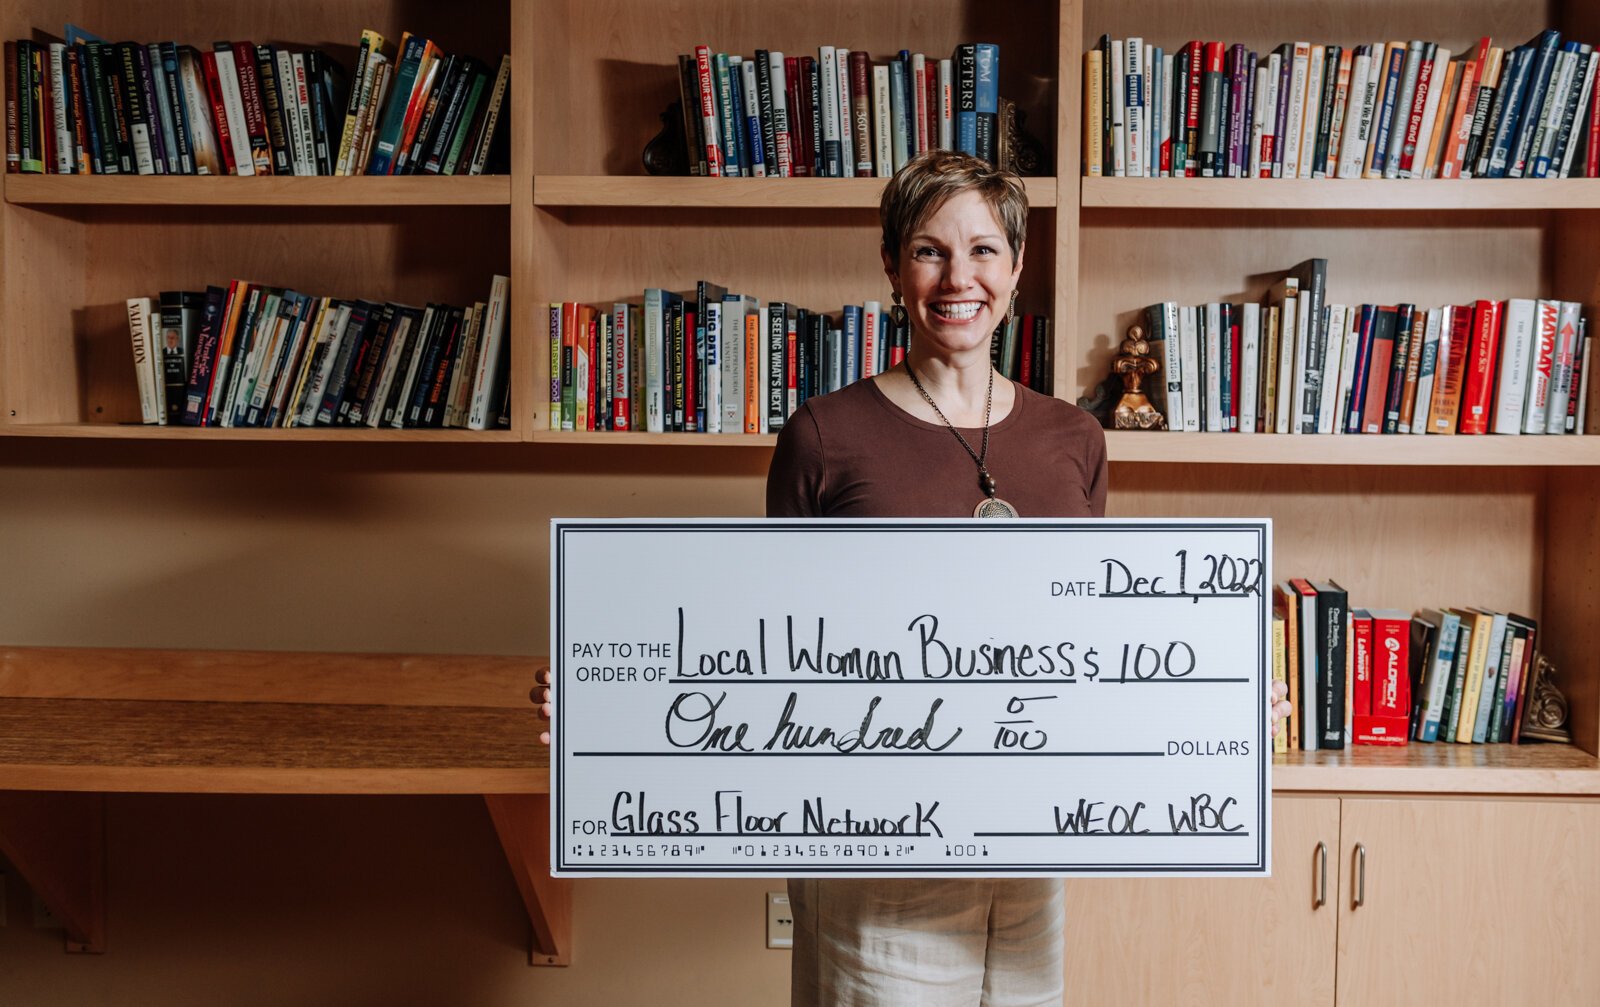 Leslee Hill, Program Director at WEOC Women's Business Center shows an example of a donor check for local women business at the Northeast Indiana Innovation Center.